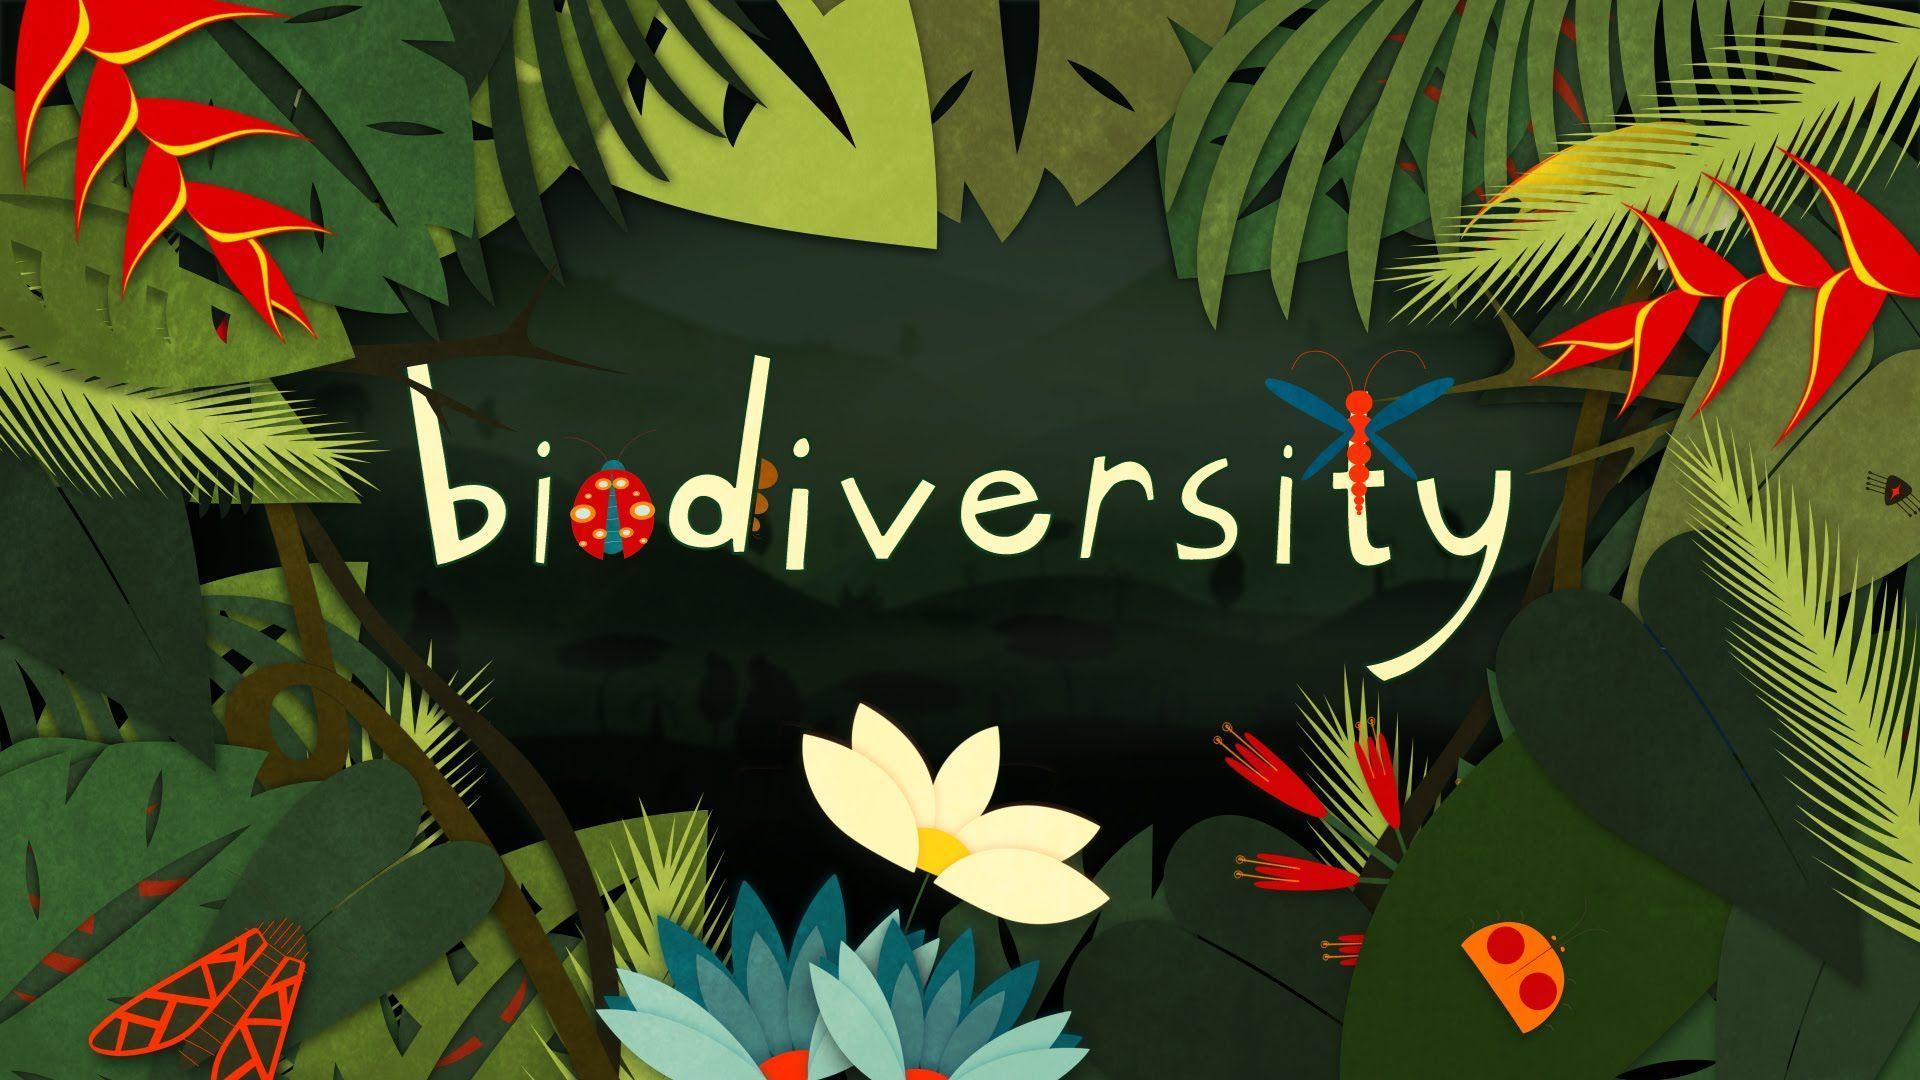 What is biodiversity online share trading